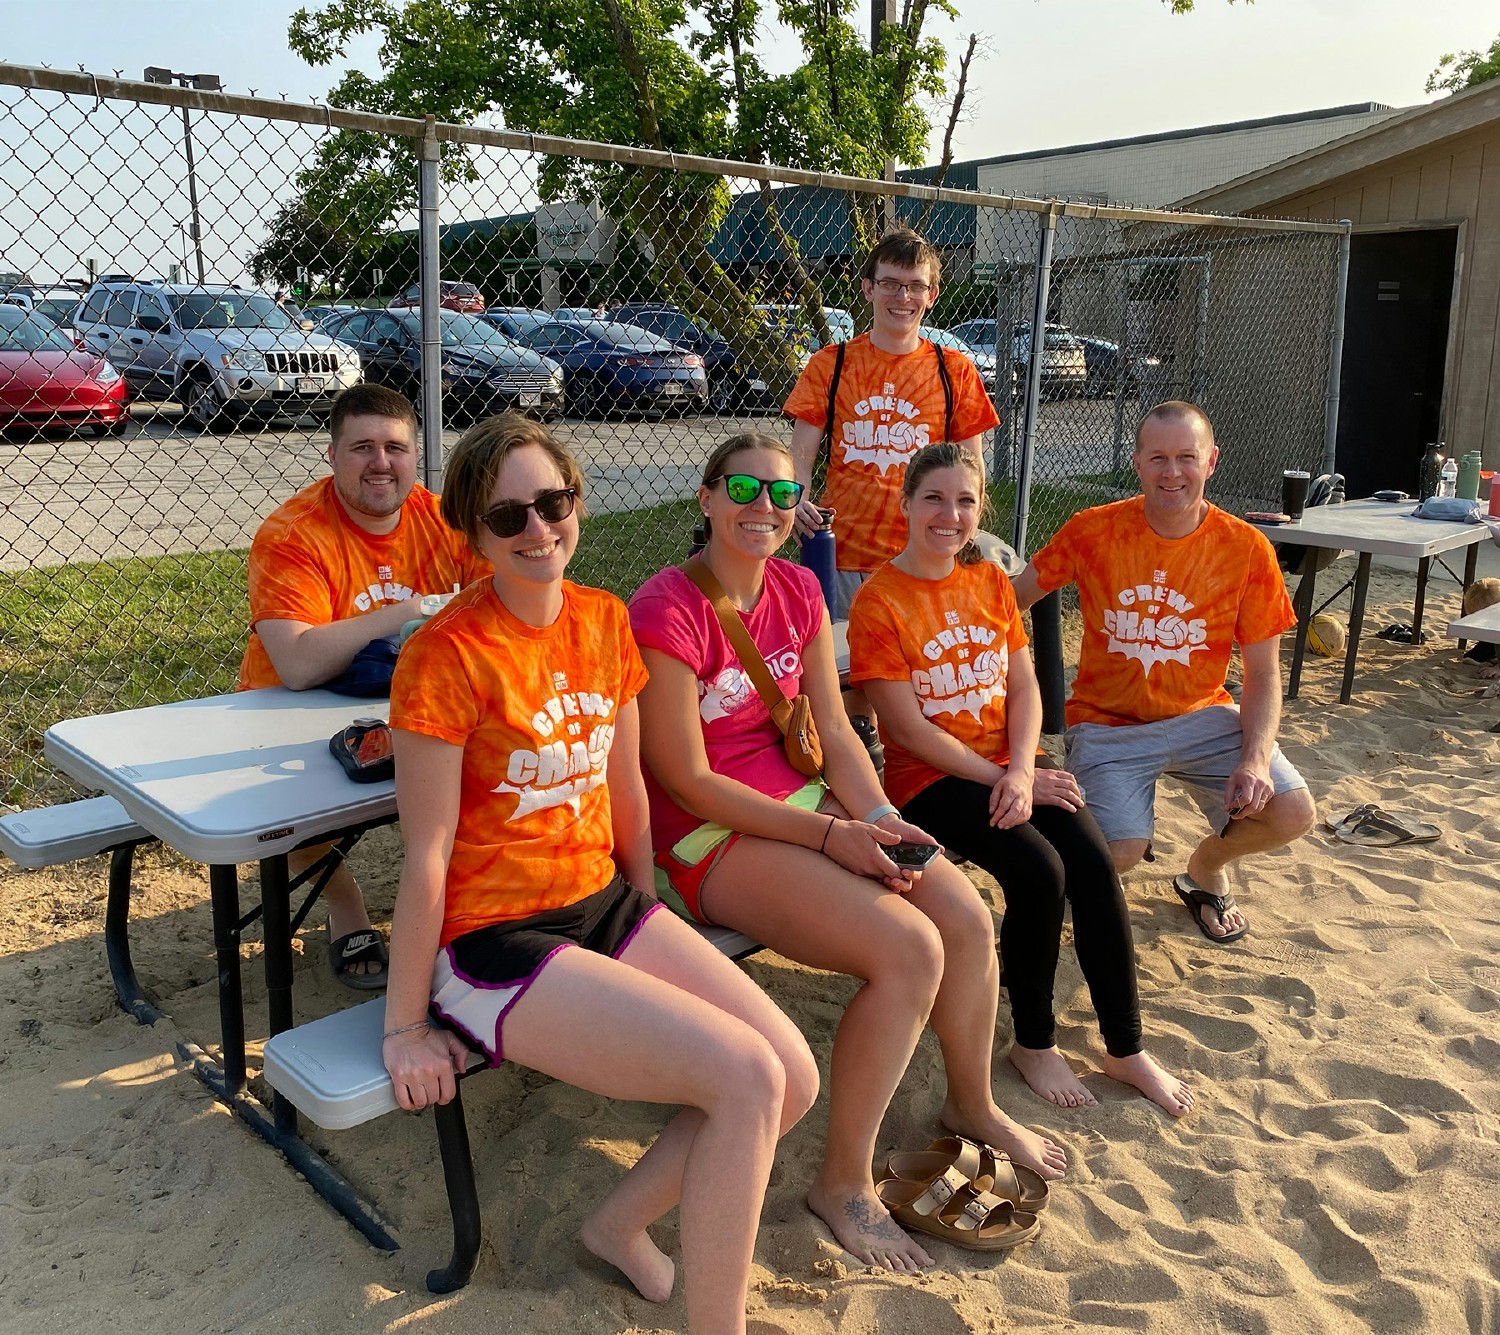 Bump, set, spike! Our summer volleyball league is always a hit with our people.